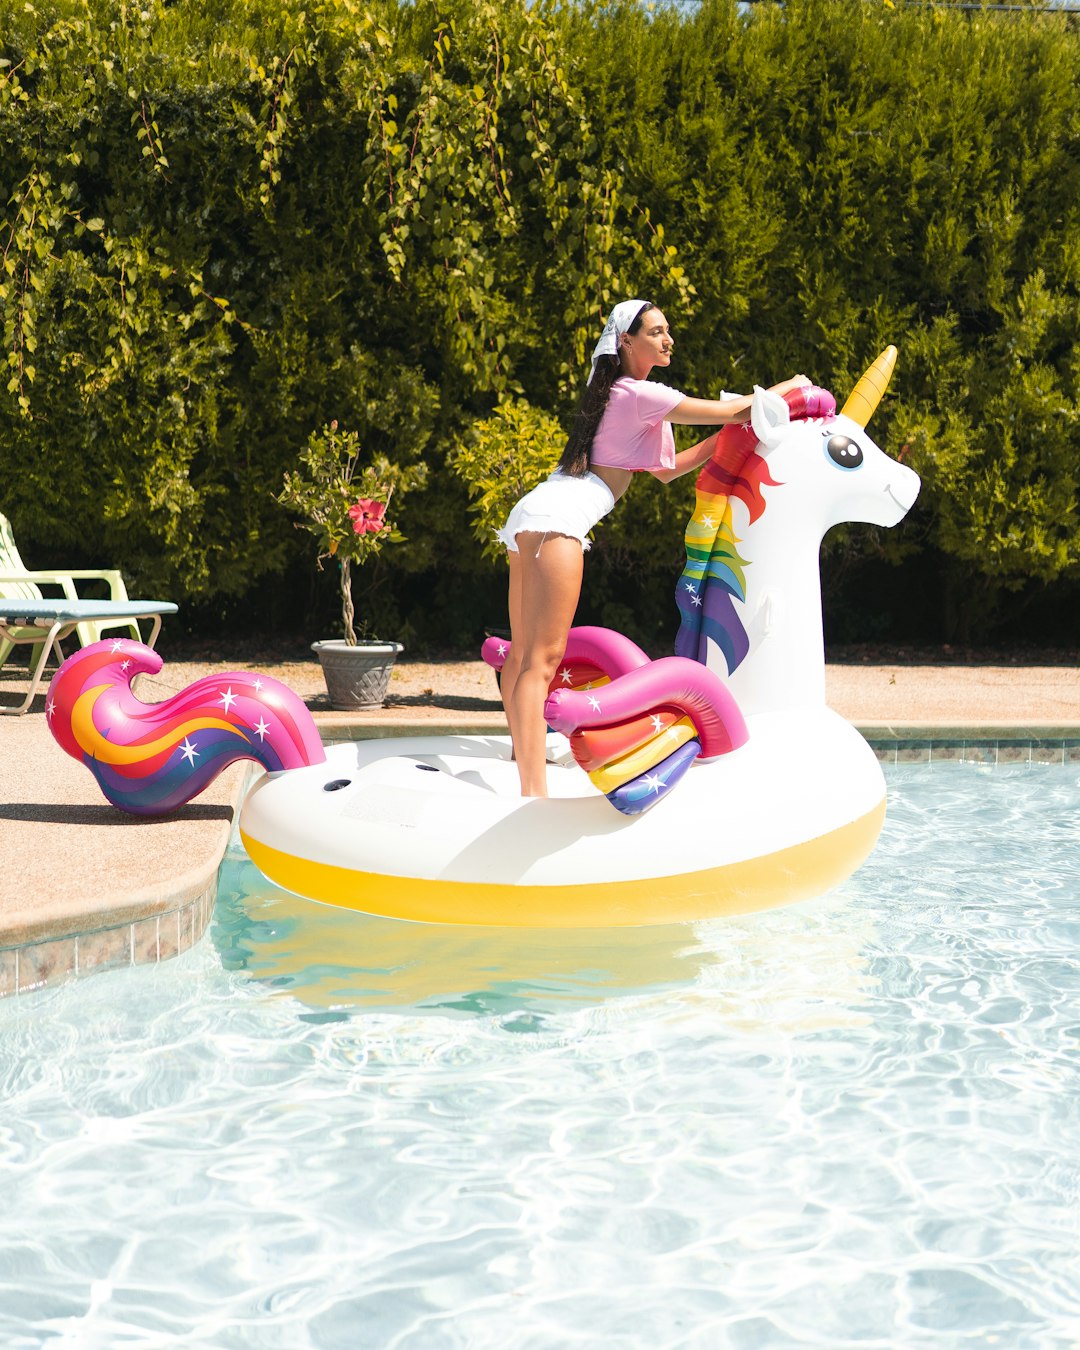 woman in white and pink bikini on white and yellow inflatable pool float during daytime